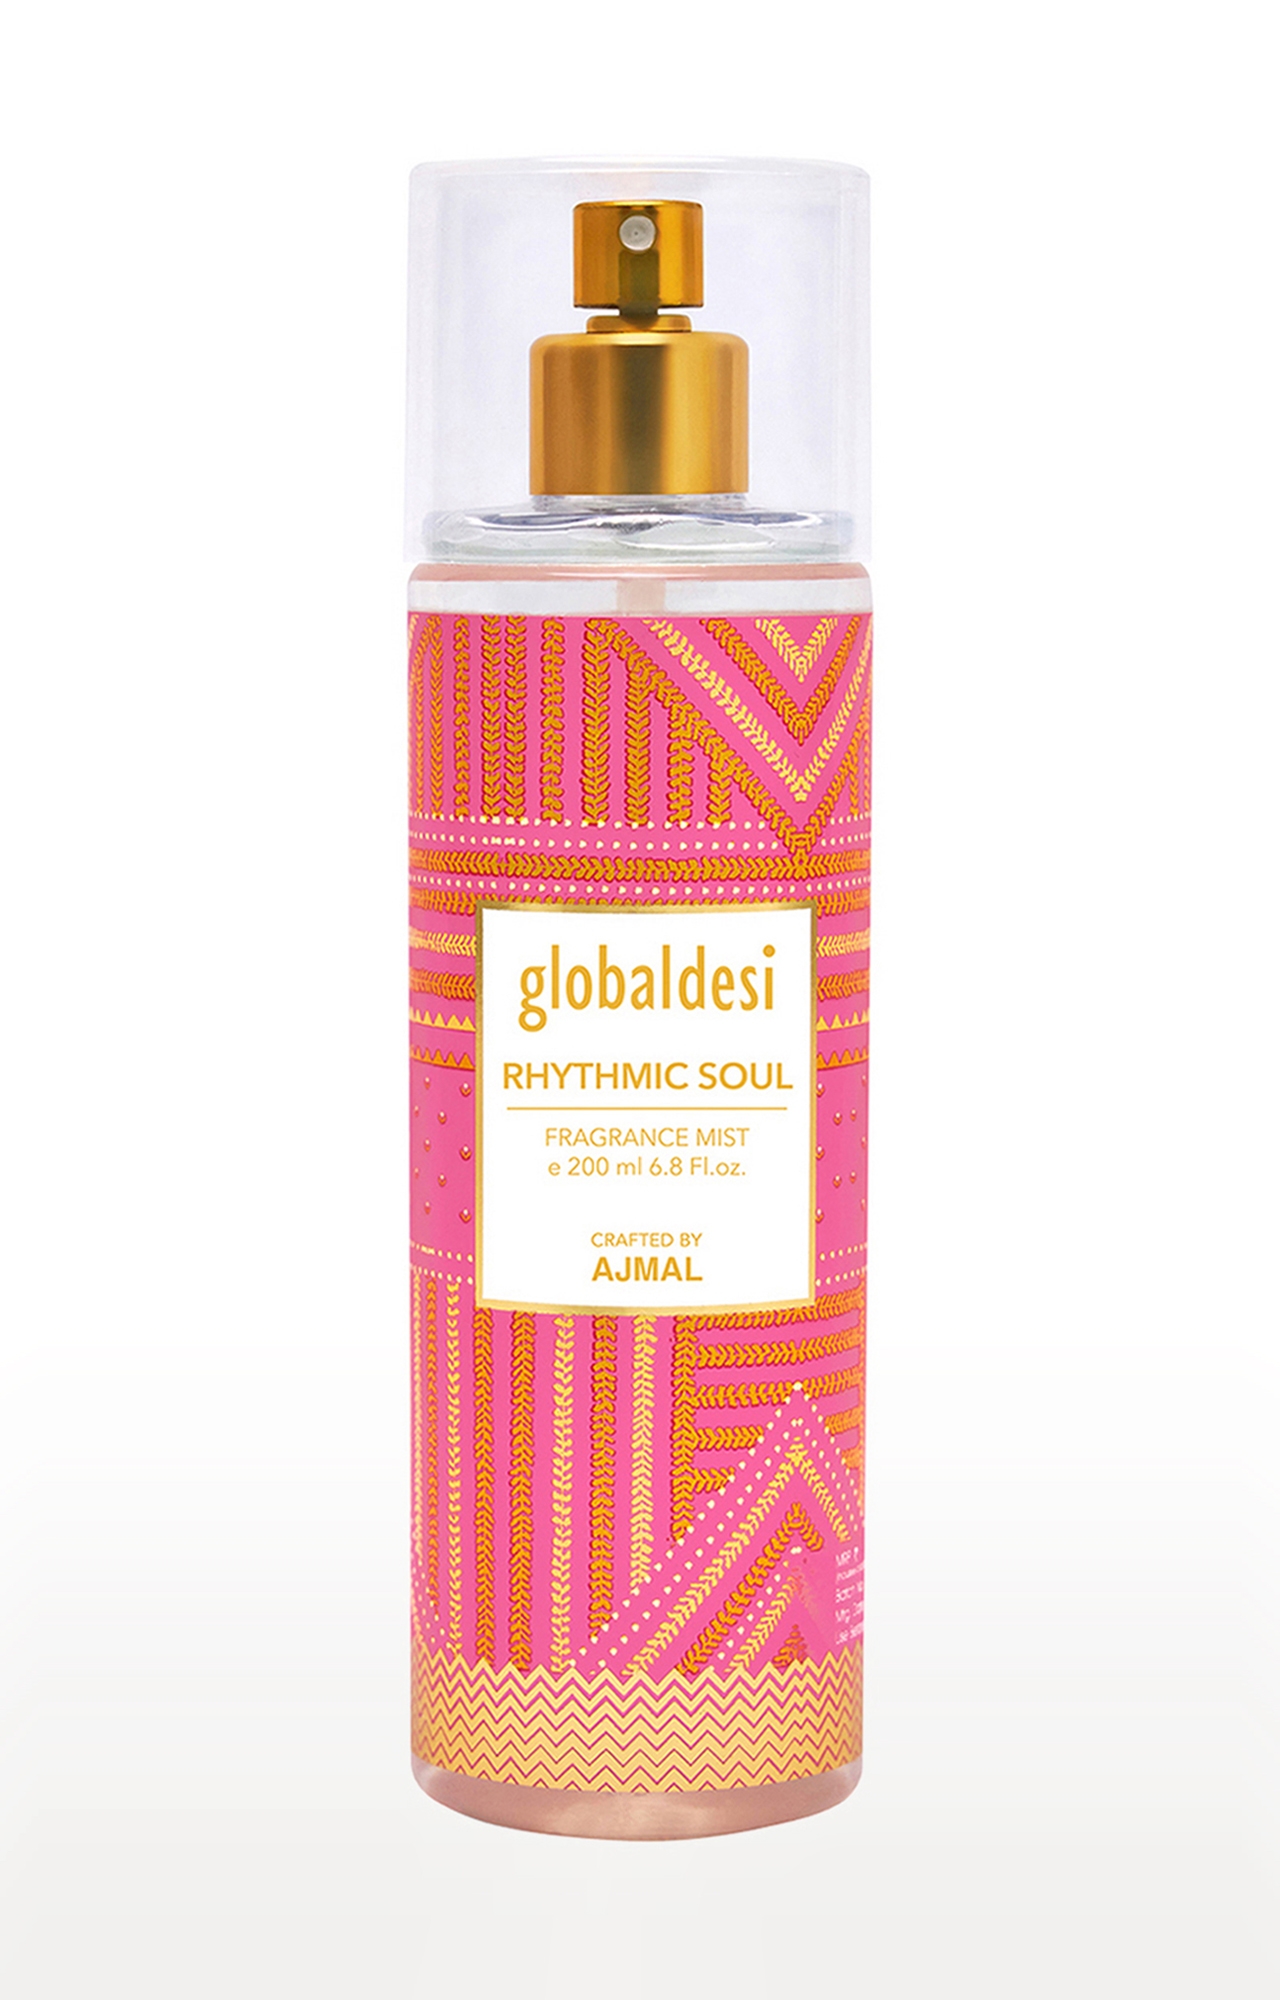 Global Desi Crafted By Ajmal | Global Desi Rhythmic Soul Body Mist Perfume 200ML Long Lasting Scent Spray Gift For Women Crafted by Ajmal 